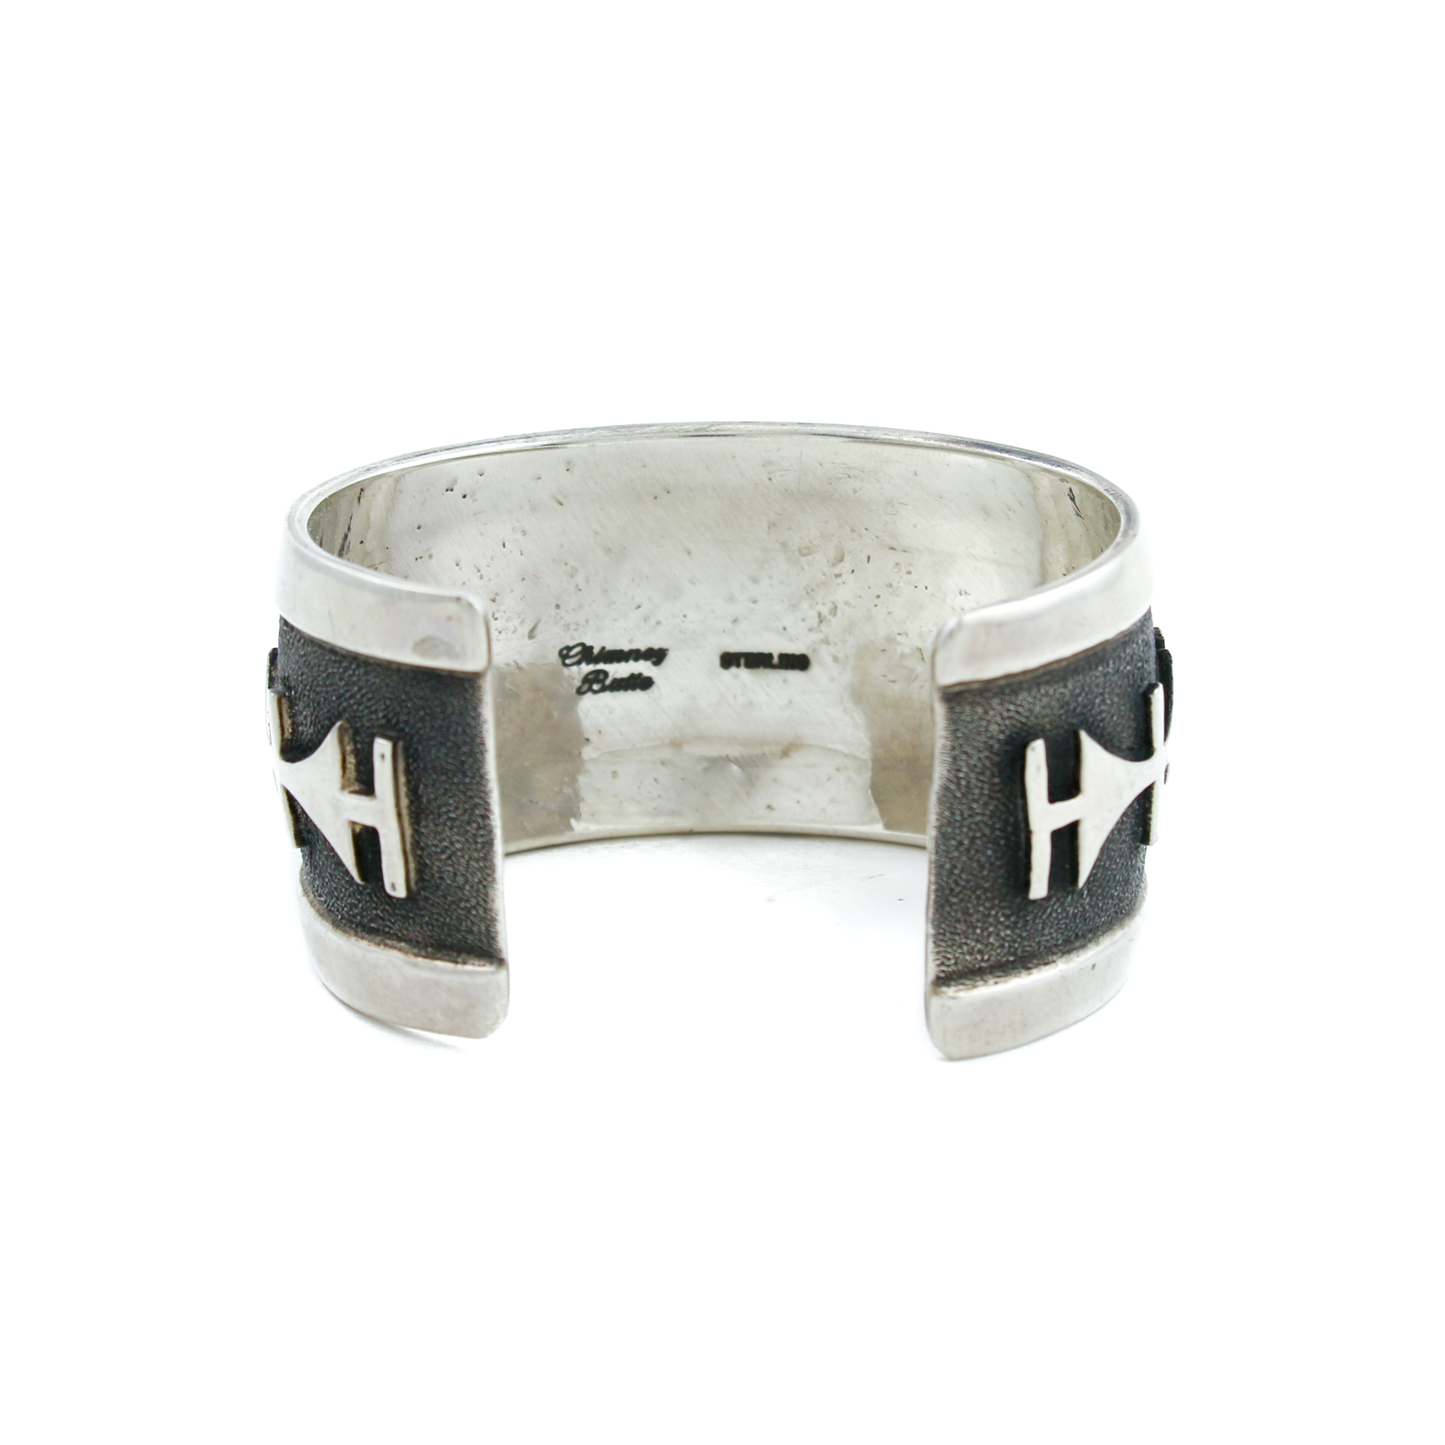 Experience the rich cultural heritage and exquisite craftsmanship of the Hopi people with our Vintage Silver Hopi Overlay Bangle Bracelet. Each bangle is a masterpiece, a testament to the artistry and traditions that have been passed down through generations.